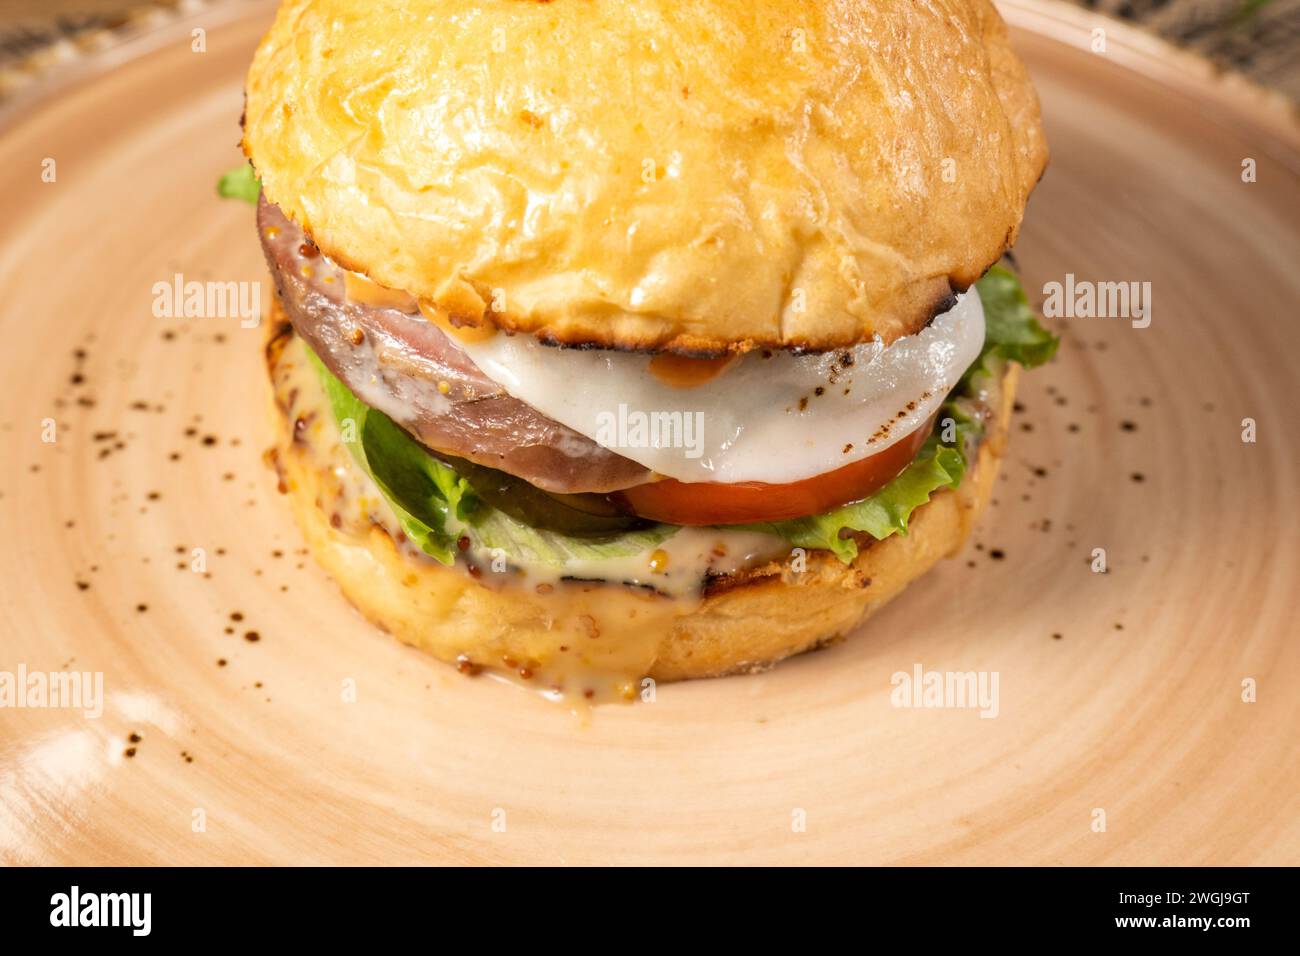 Savory Delight, A Symphony of Flavors in This Gourmet burger Stock Photo